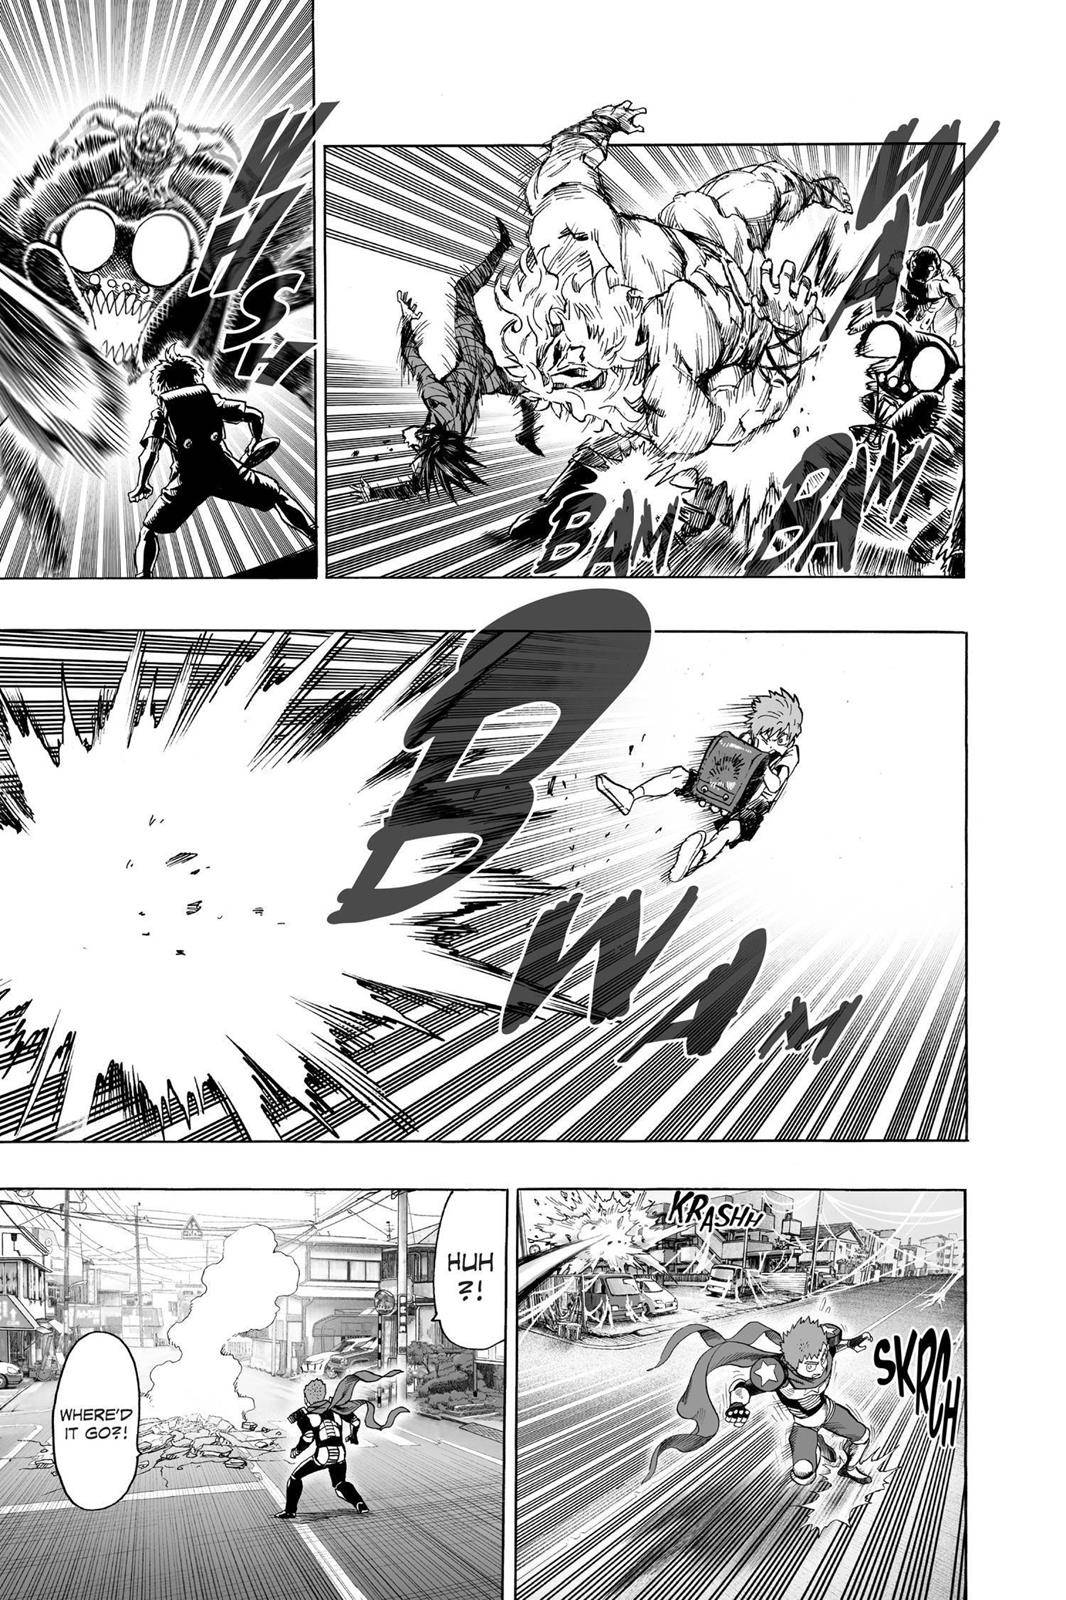 One-Punch Man Chapter 55.7 - One Punch Man Manga Online